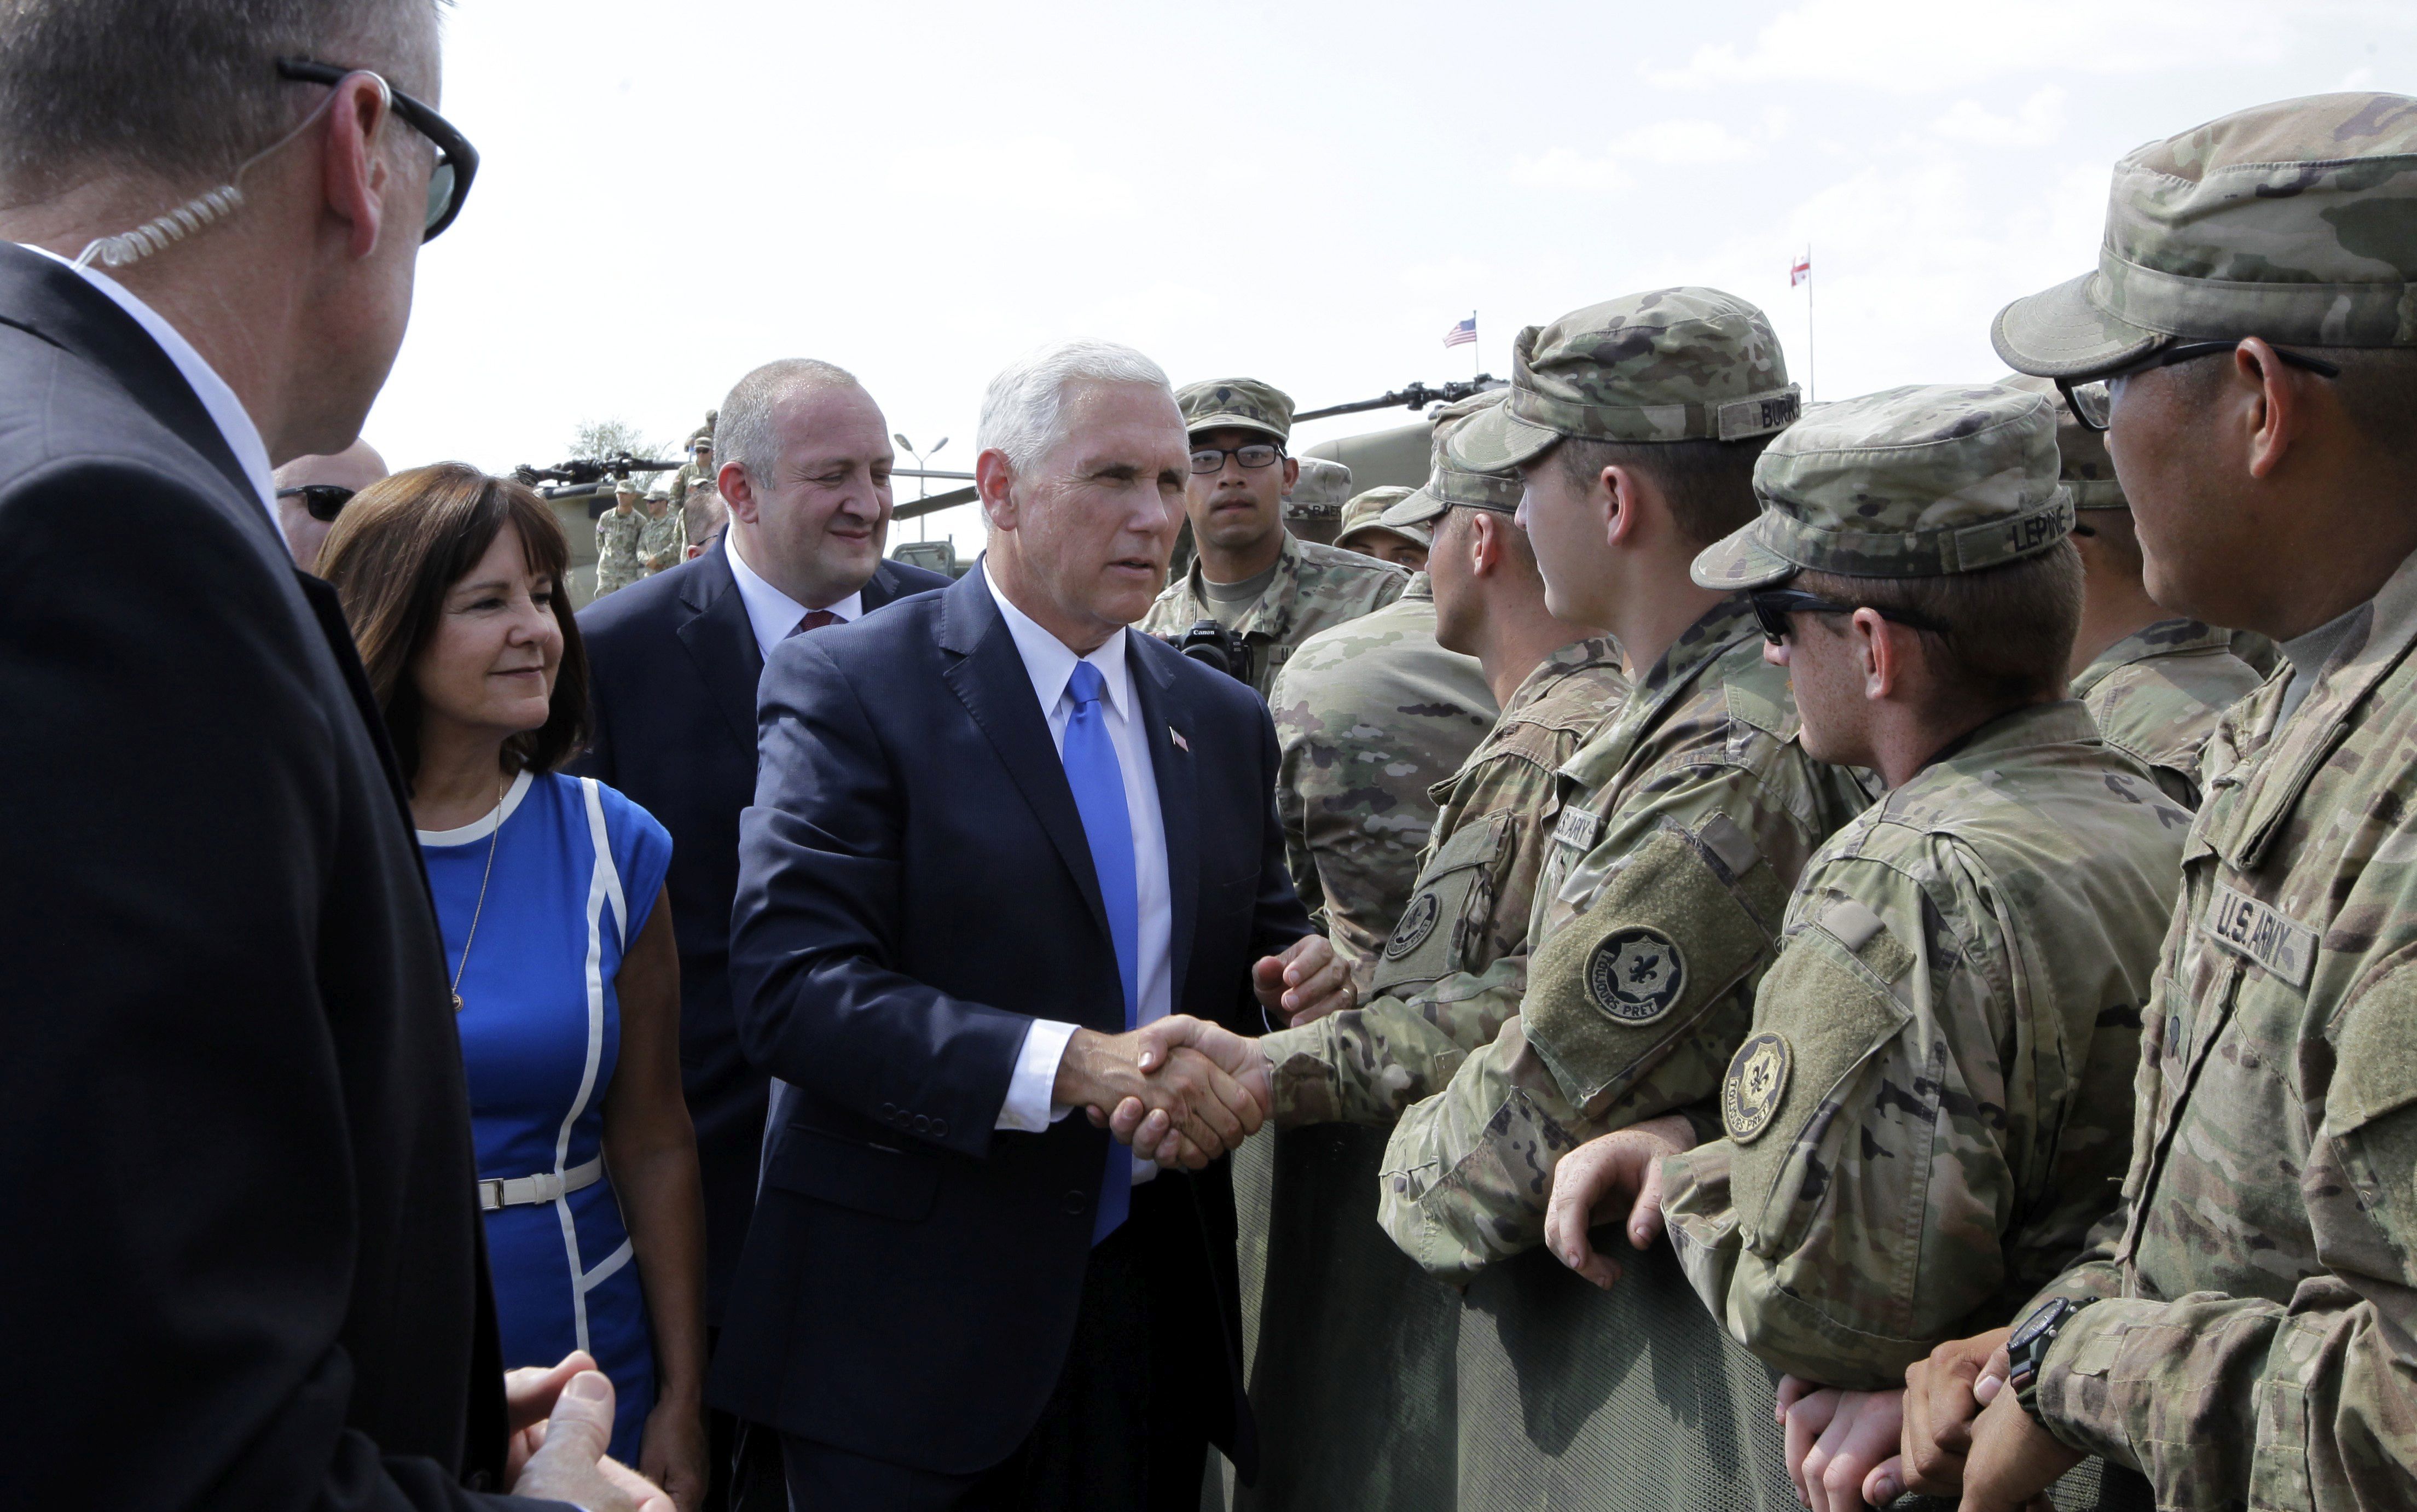 epa06119924 US Vice President Mike Pence (C) and his wife Karen Pence (2-L) greet servicemen participating in the Noble Partner 2017 joint multinational military exercises outside Tbilisi, Georgia, 01 August 2017.  EPA/SHAKH AIVAZOV/POOL